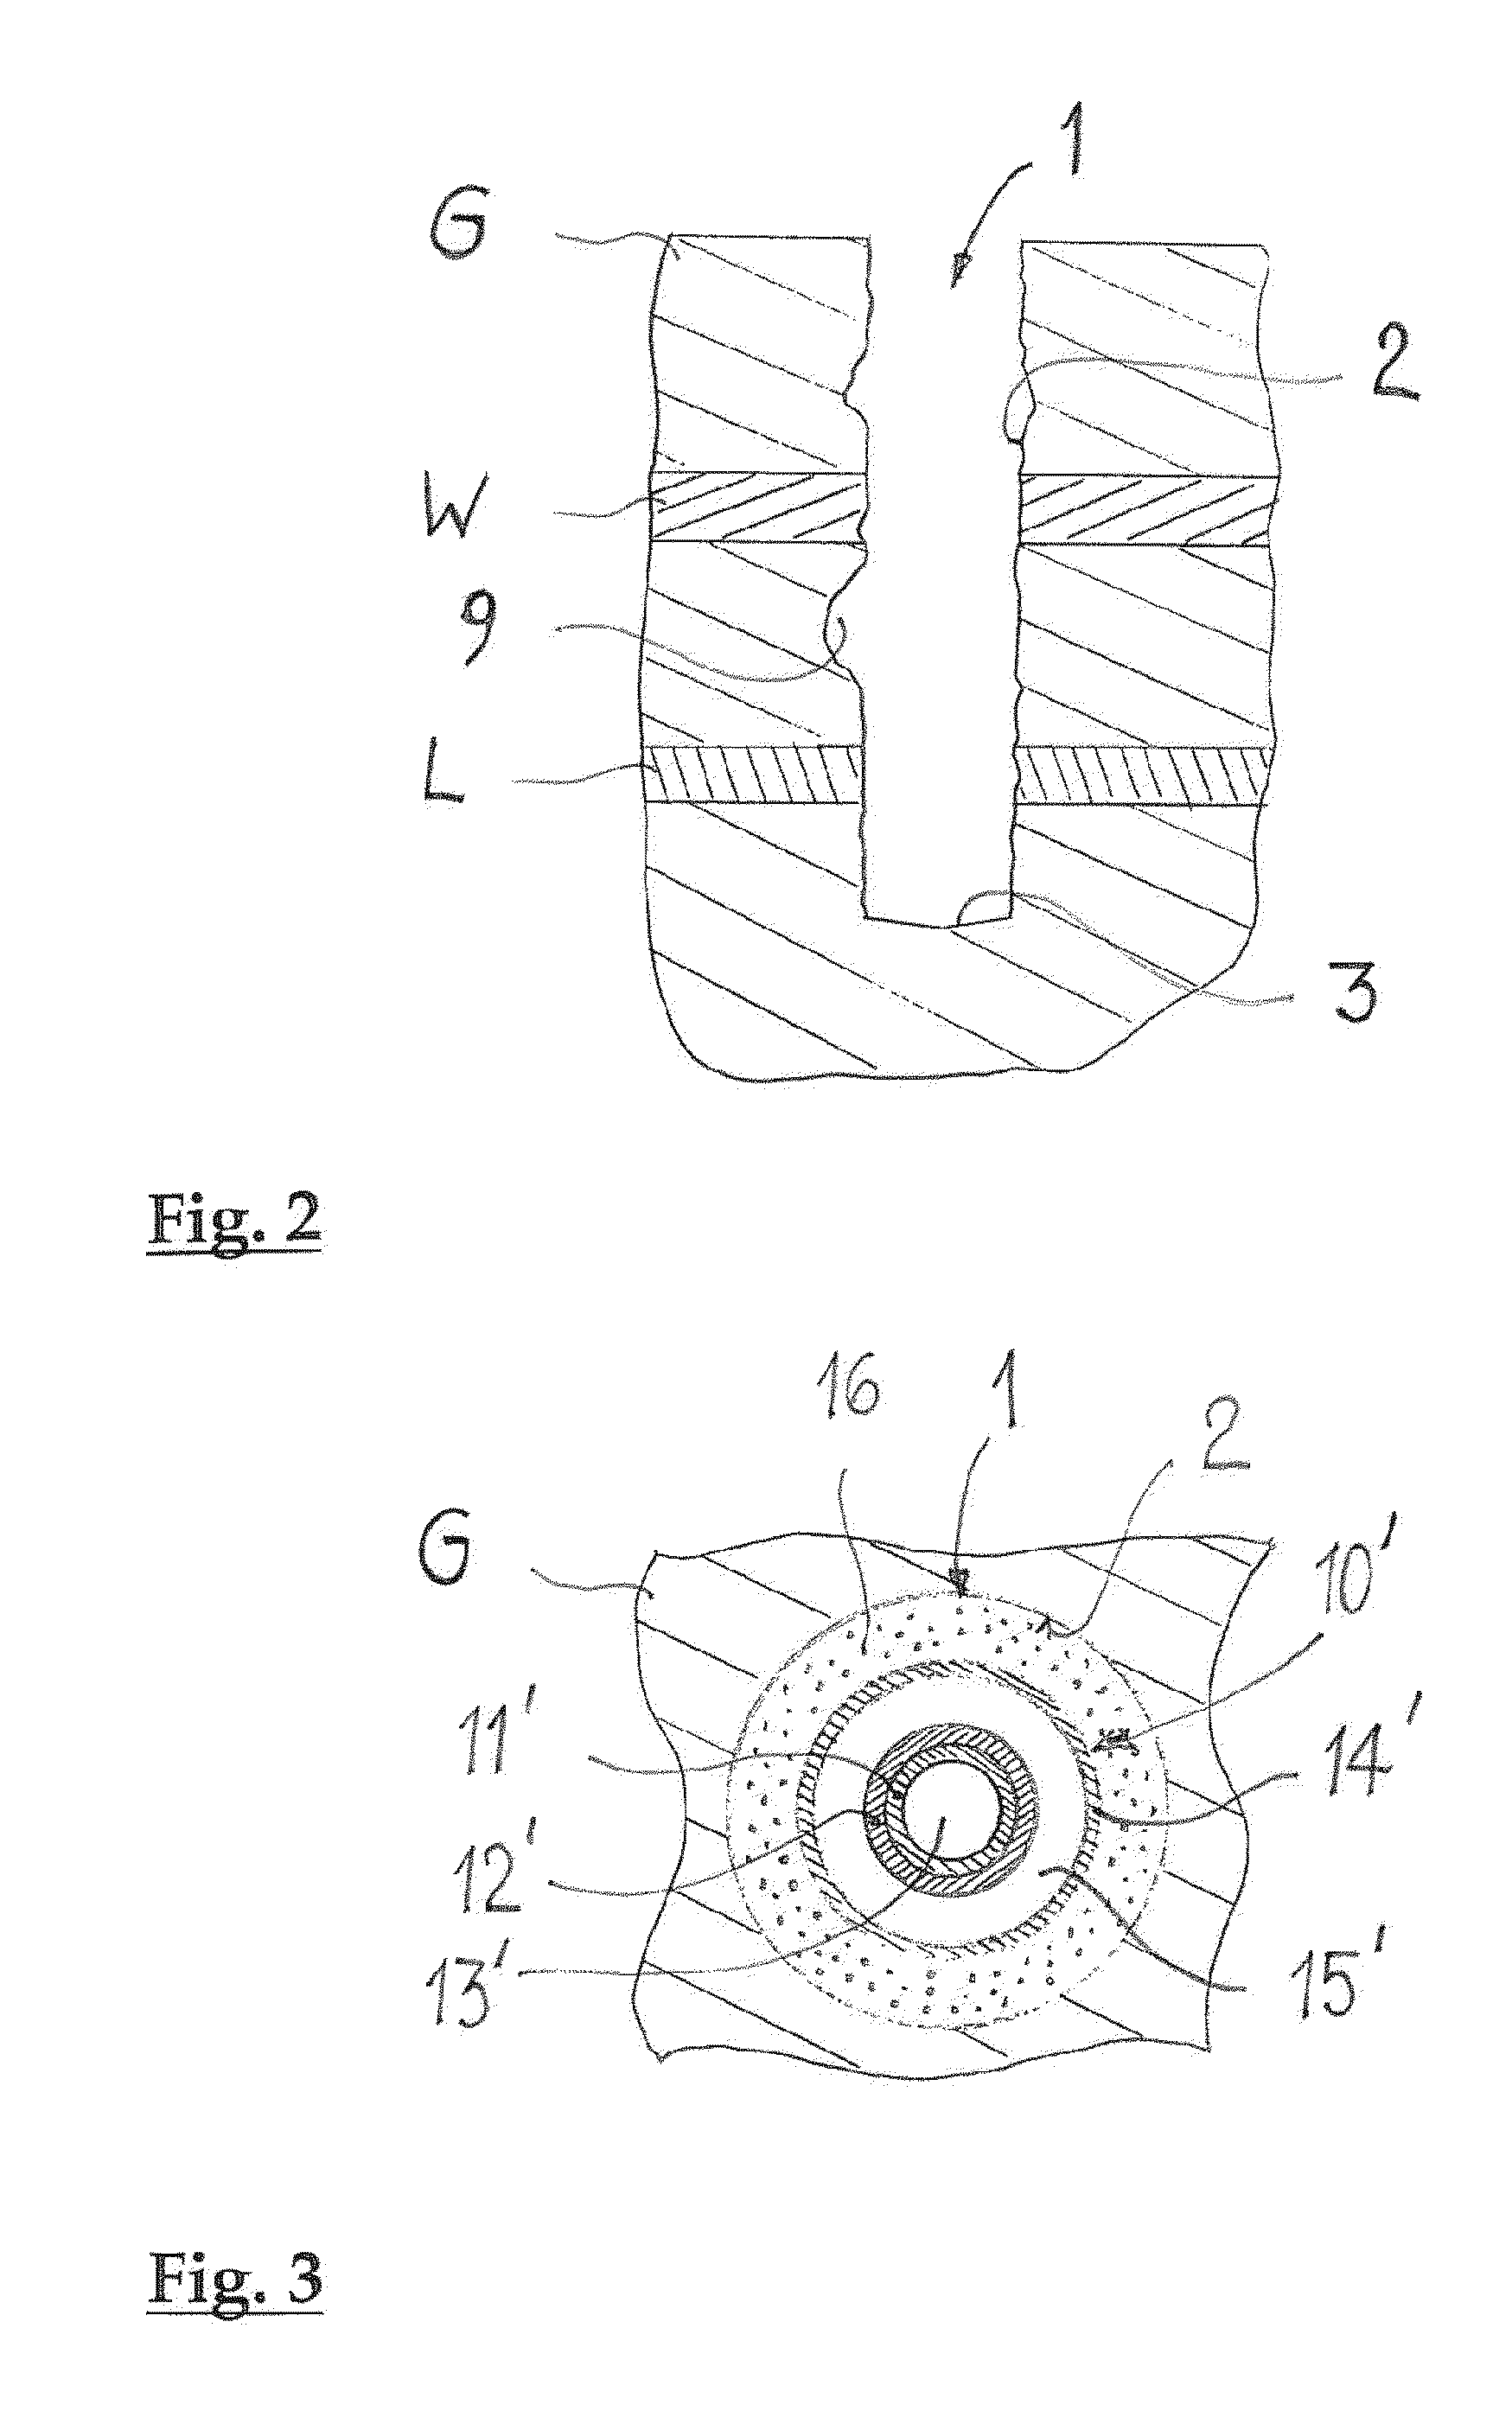 Coaxial ground heat exchanger and method for installing said ground heat exchanger in the ground